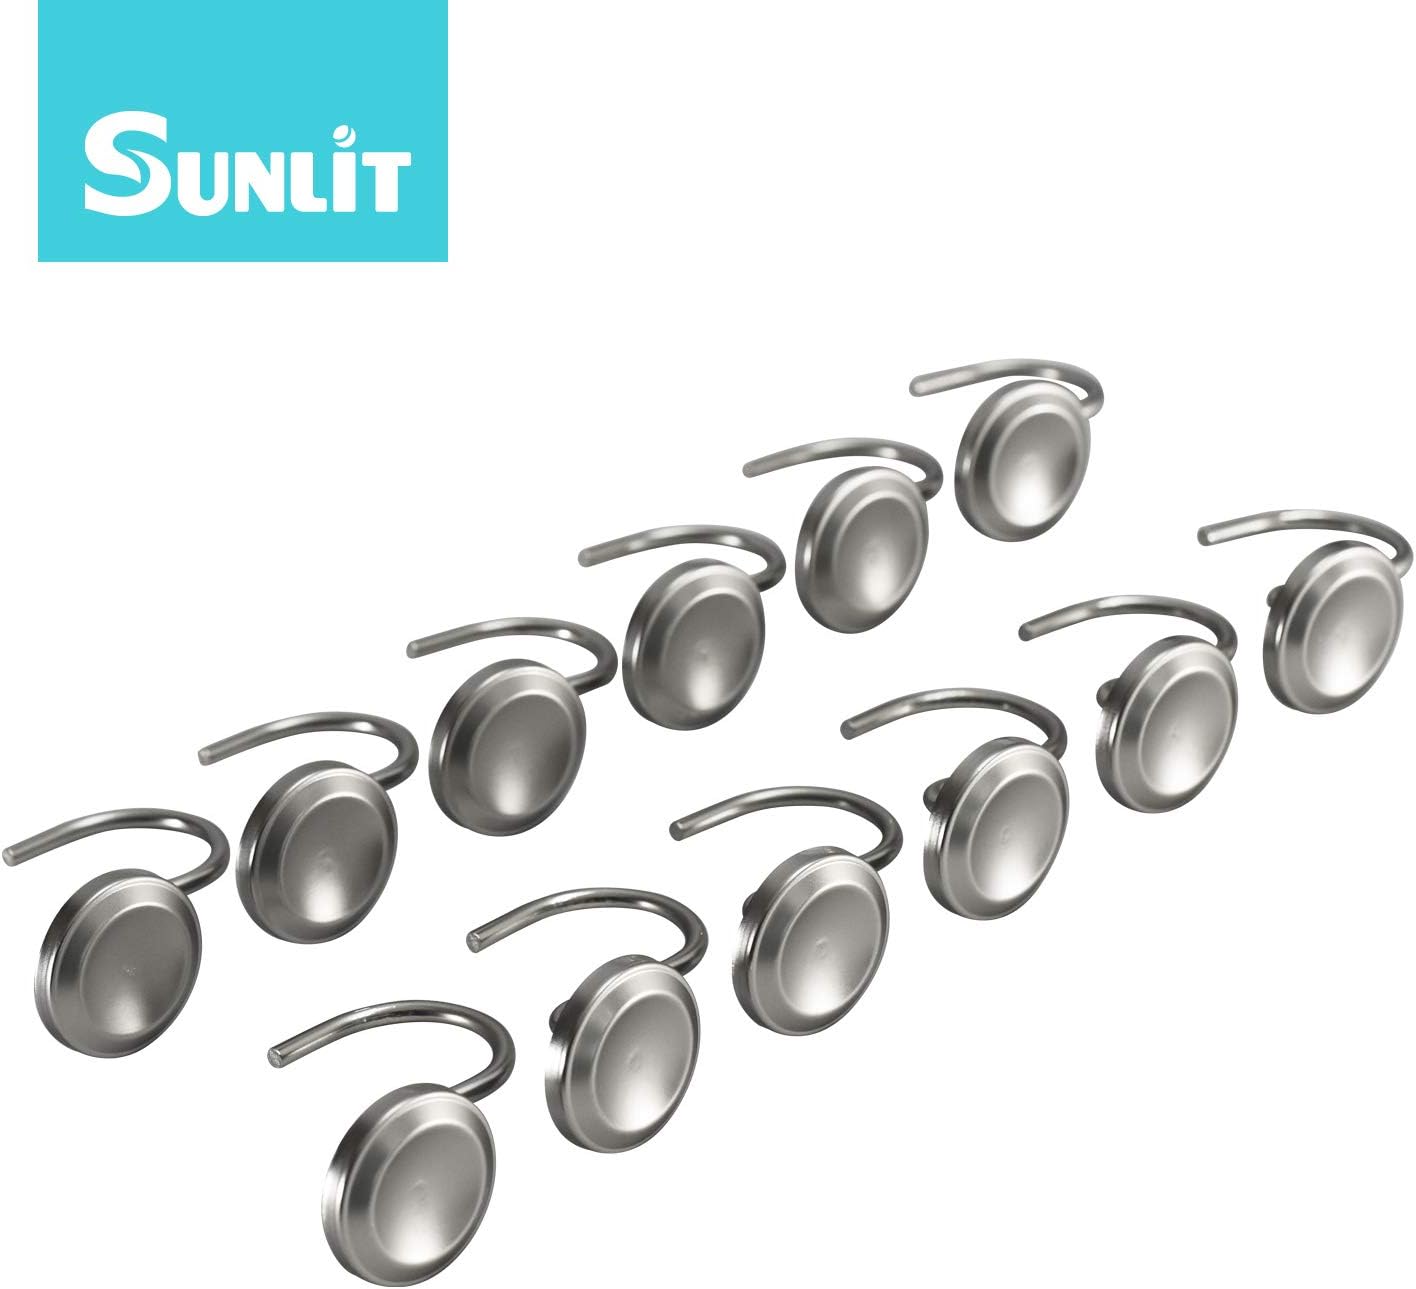 Sunlit Luxury Design Brushed Nickel Oval Shower Curtain Hooks Rust Proof Oil Rubbed Metal Shower Curtain Rings - Satin Matte Silver - 12 Pack